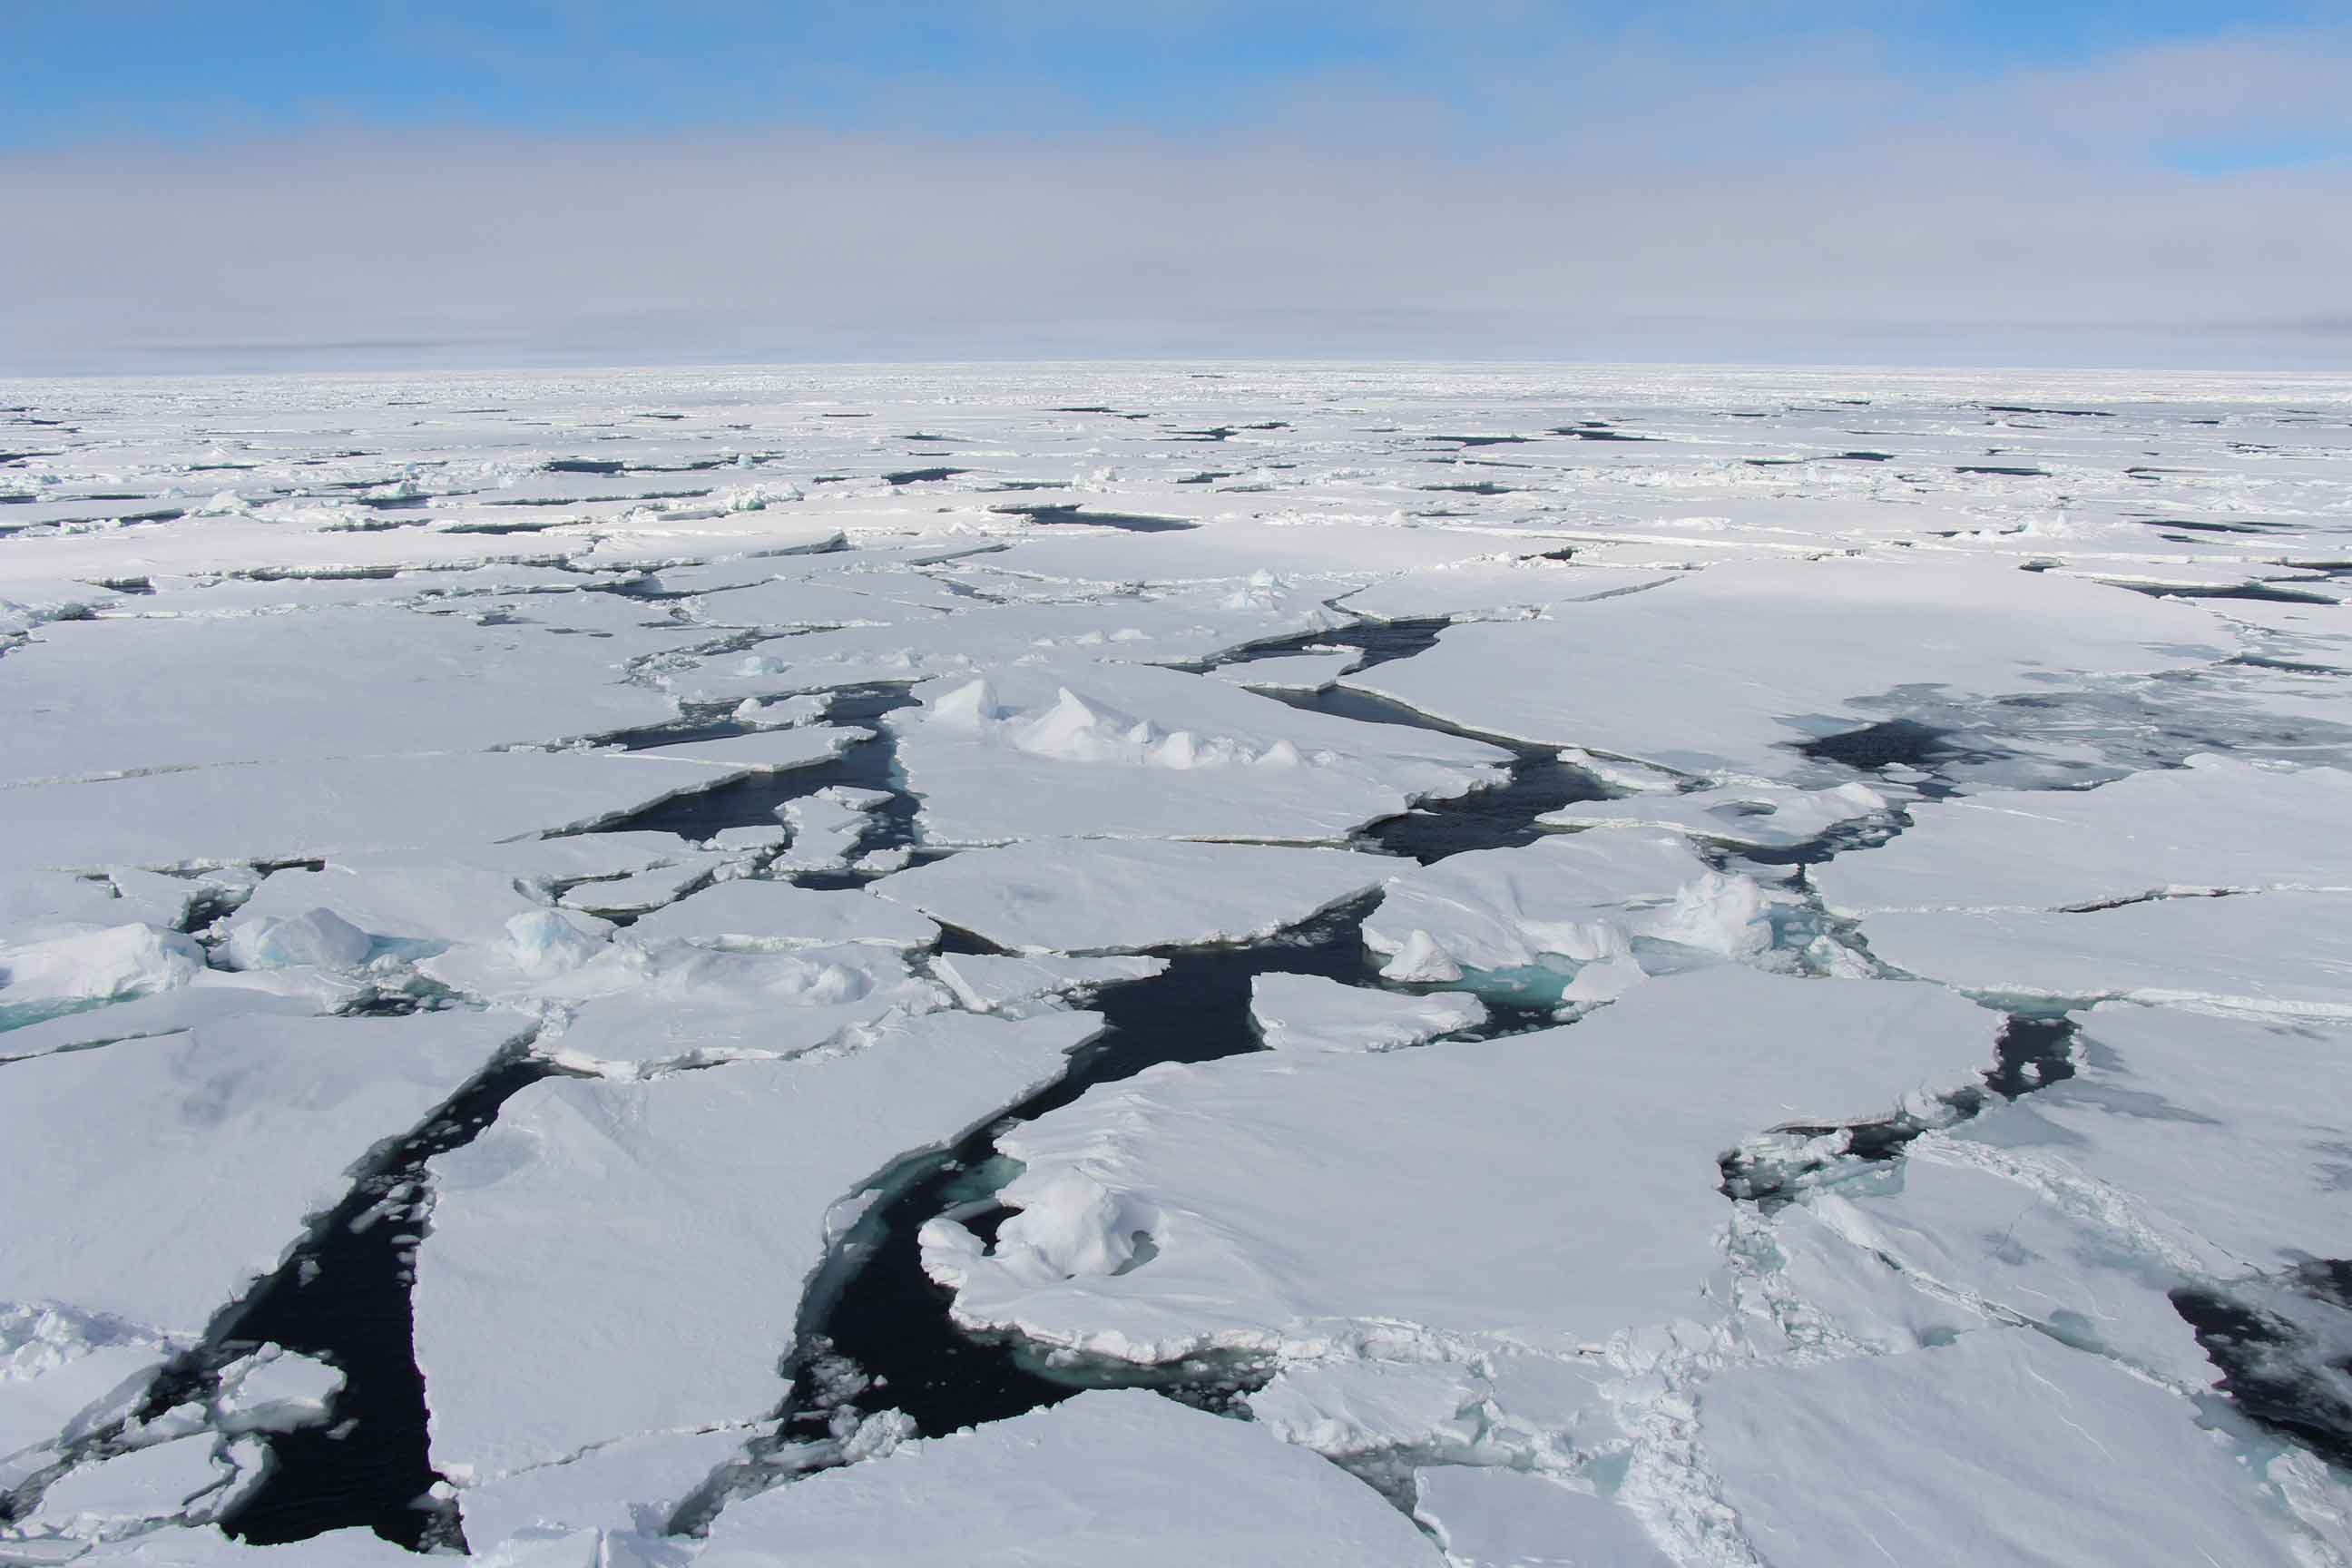 The Arctic sea ice has declined significantly during the last years.